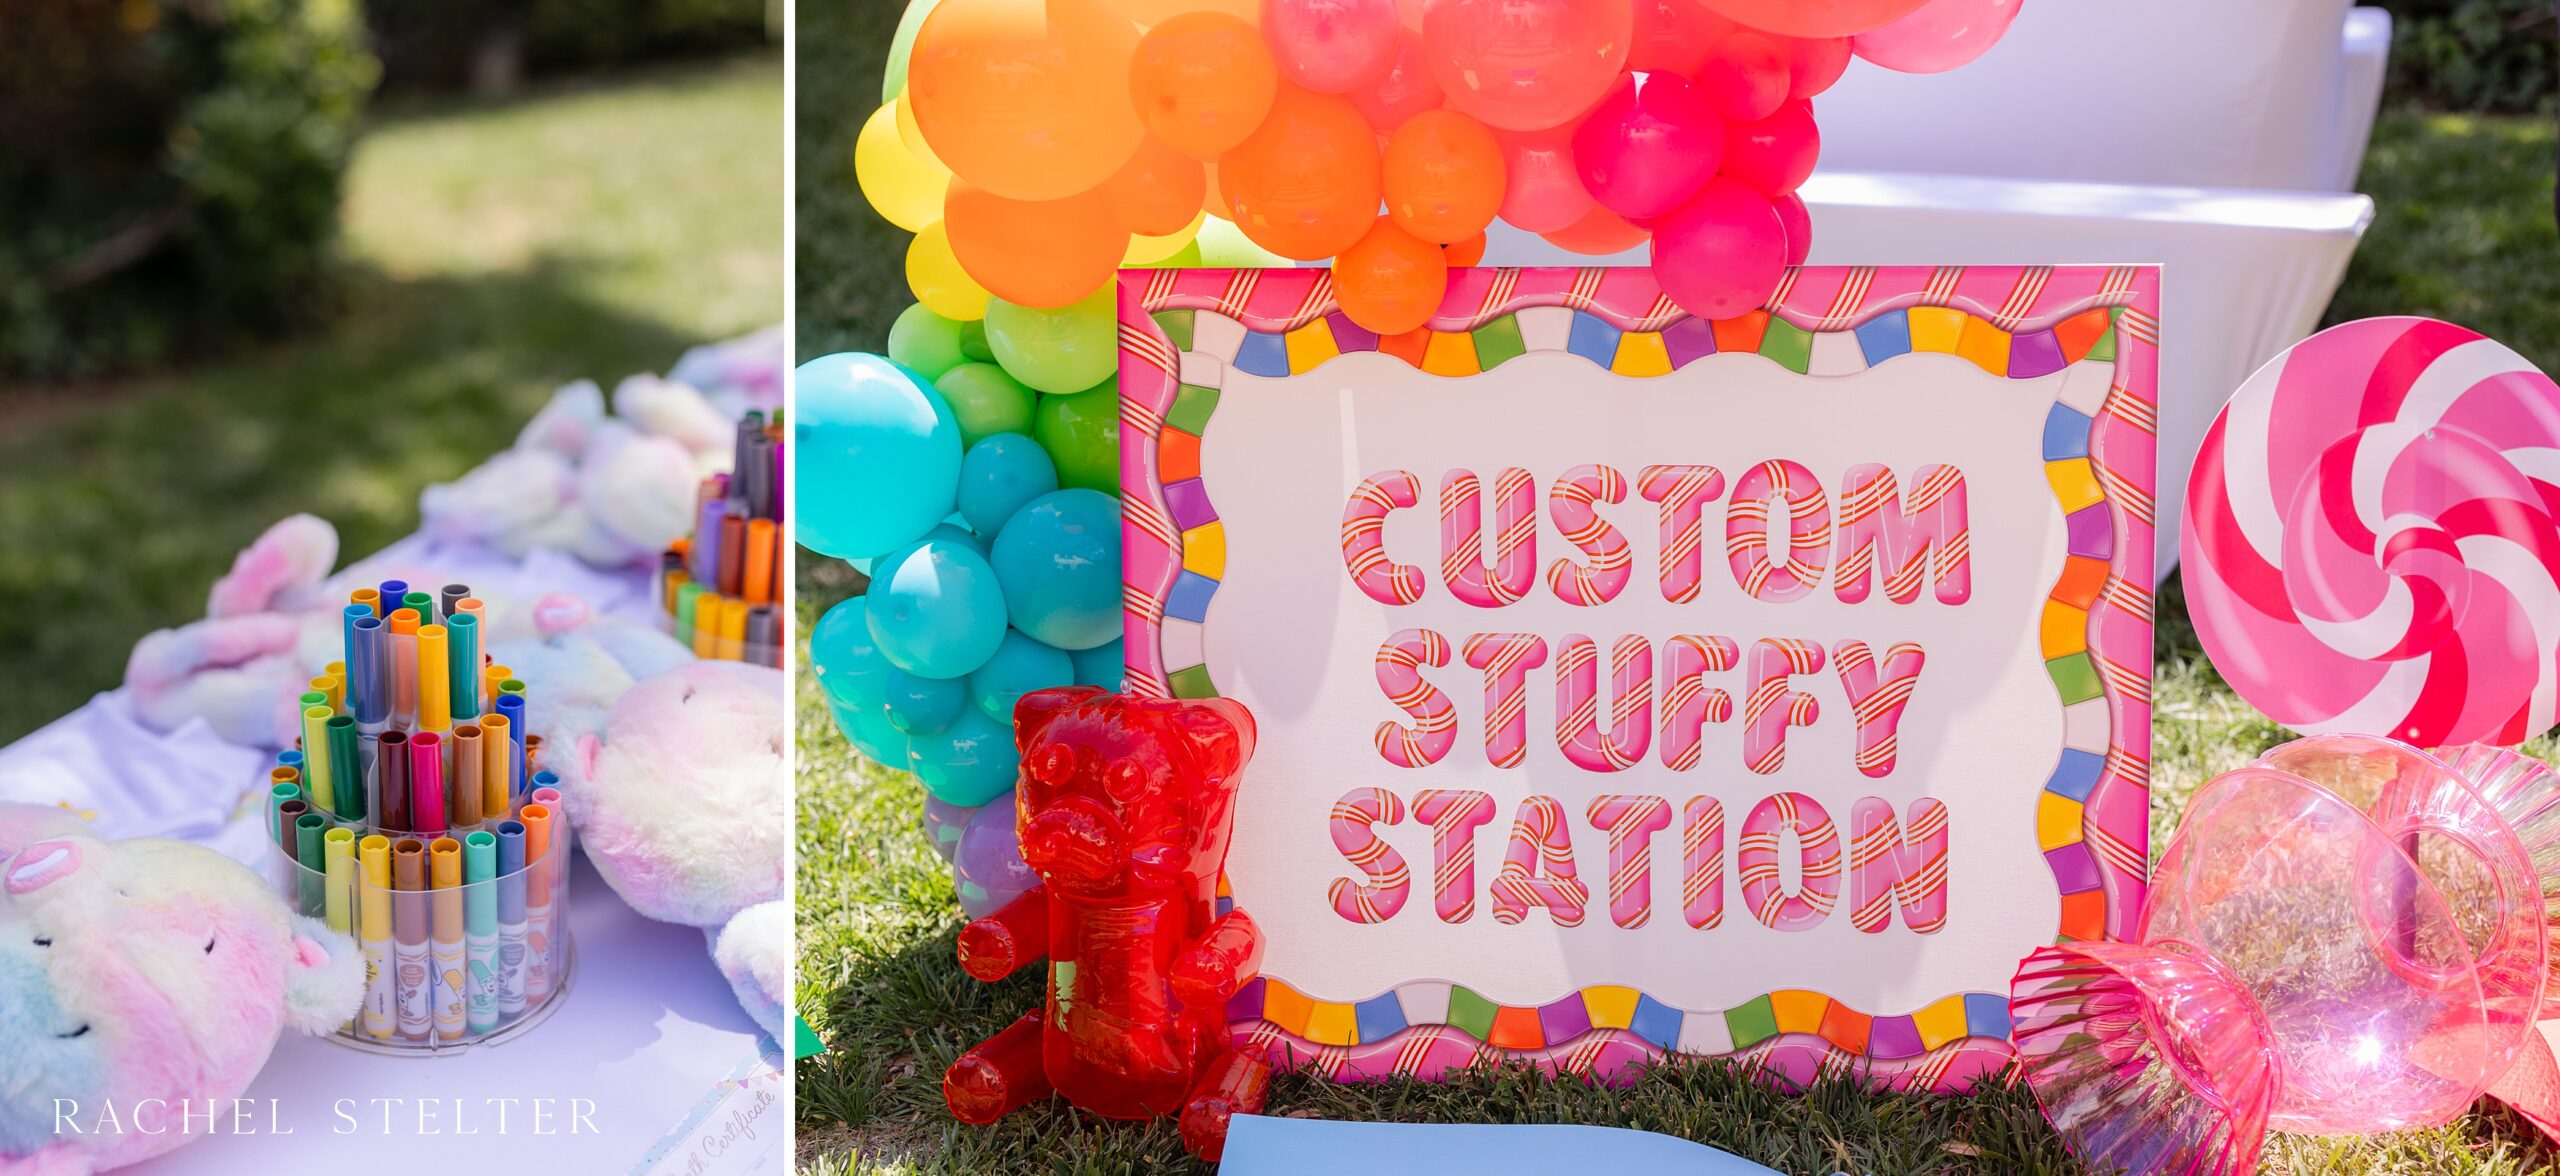 stuffed animal station by Little Artist Party in Pacific Palisades